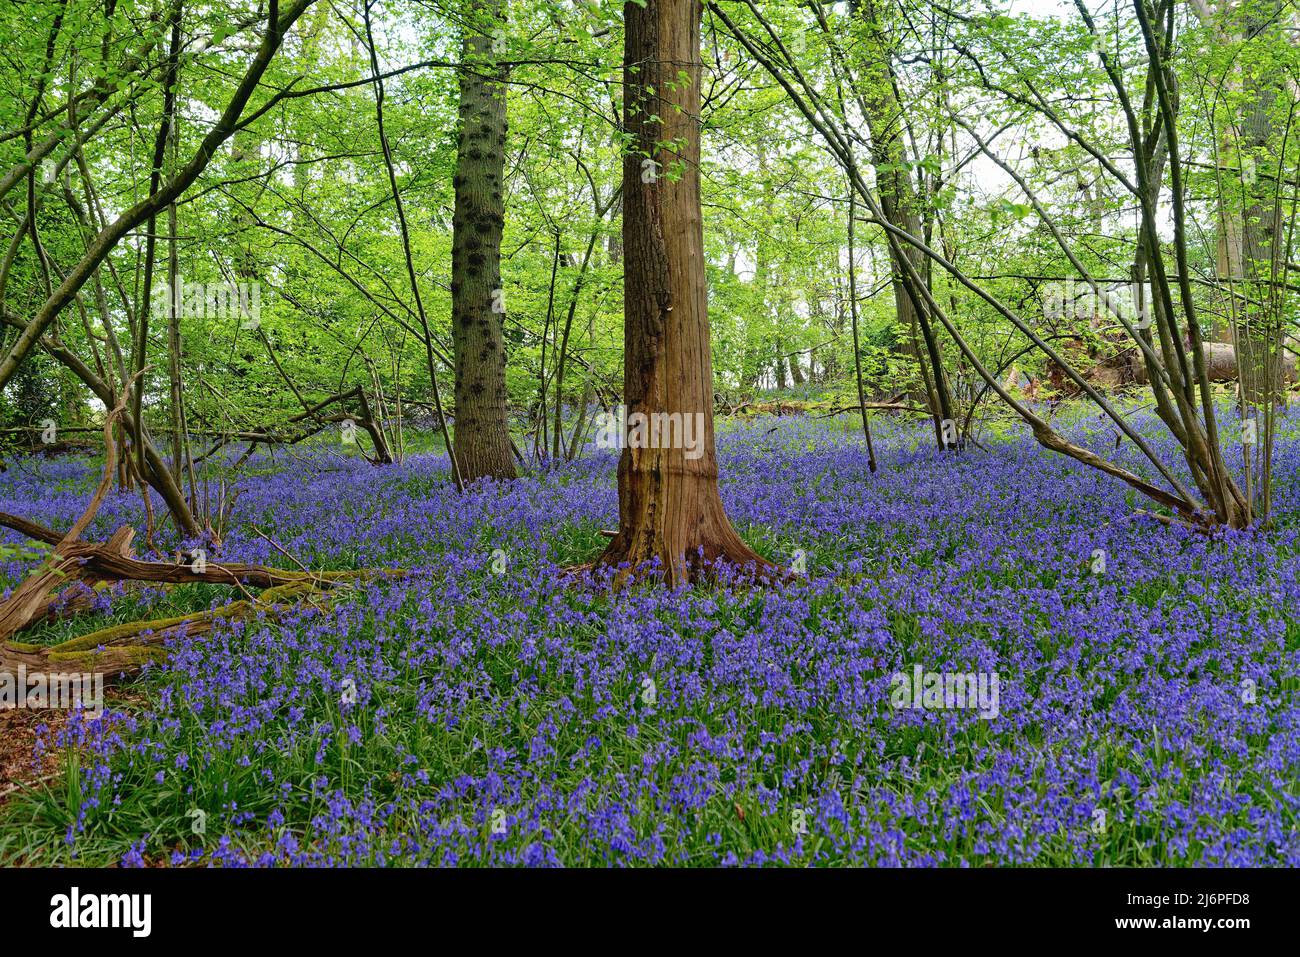 Bluebells, Hyacinthoides non scripta, flowering in woodlands in the Surrey Hills England UK Stock Photo